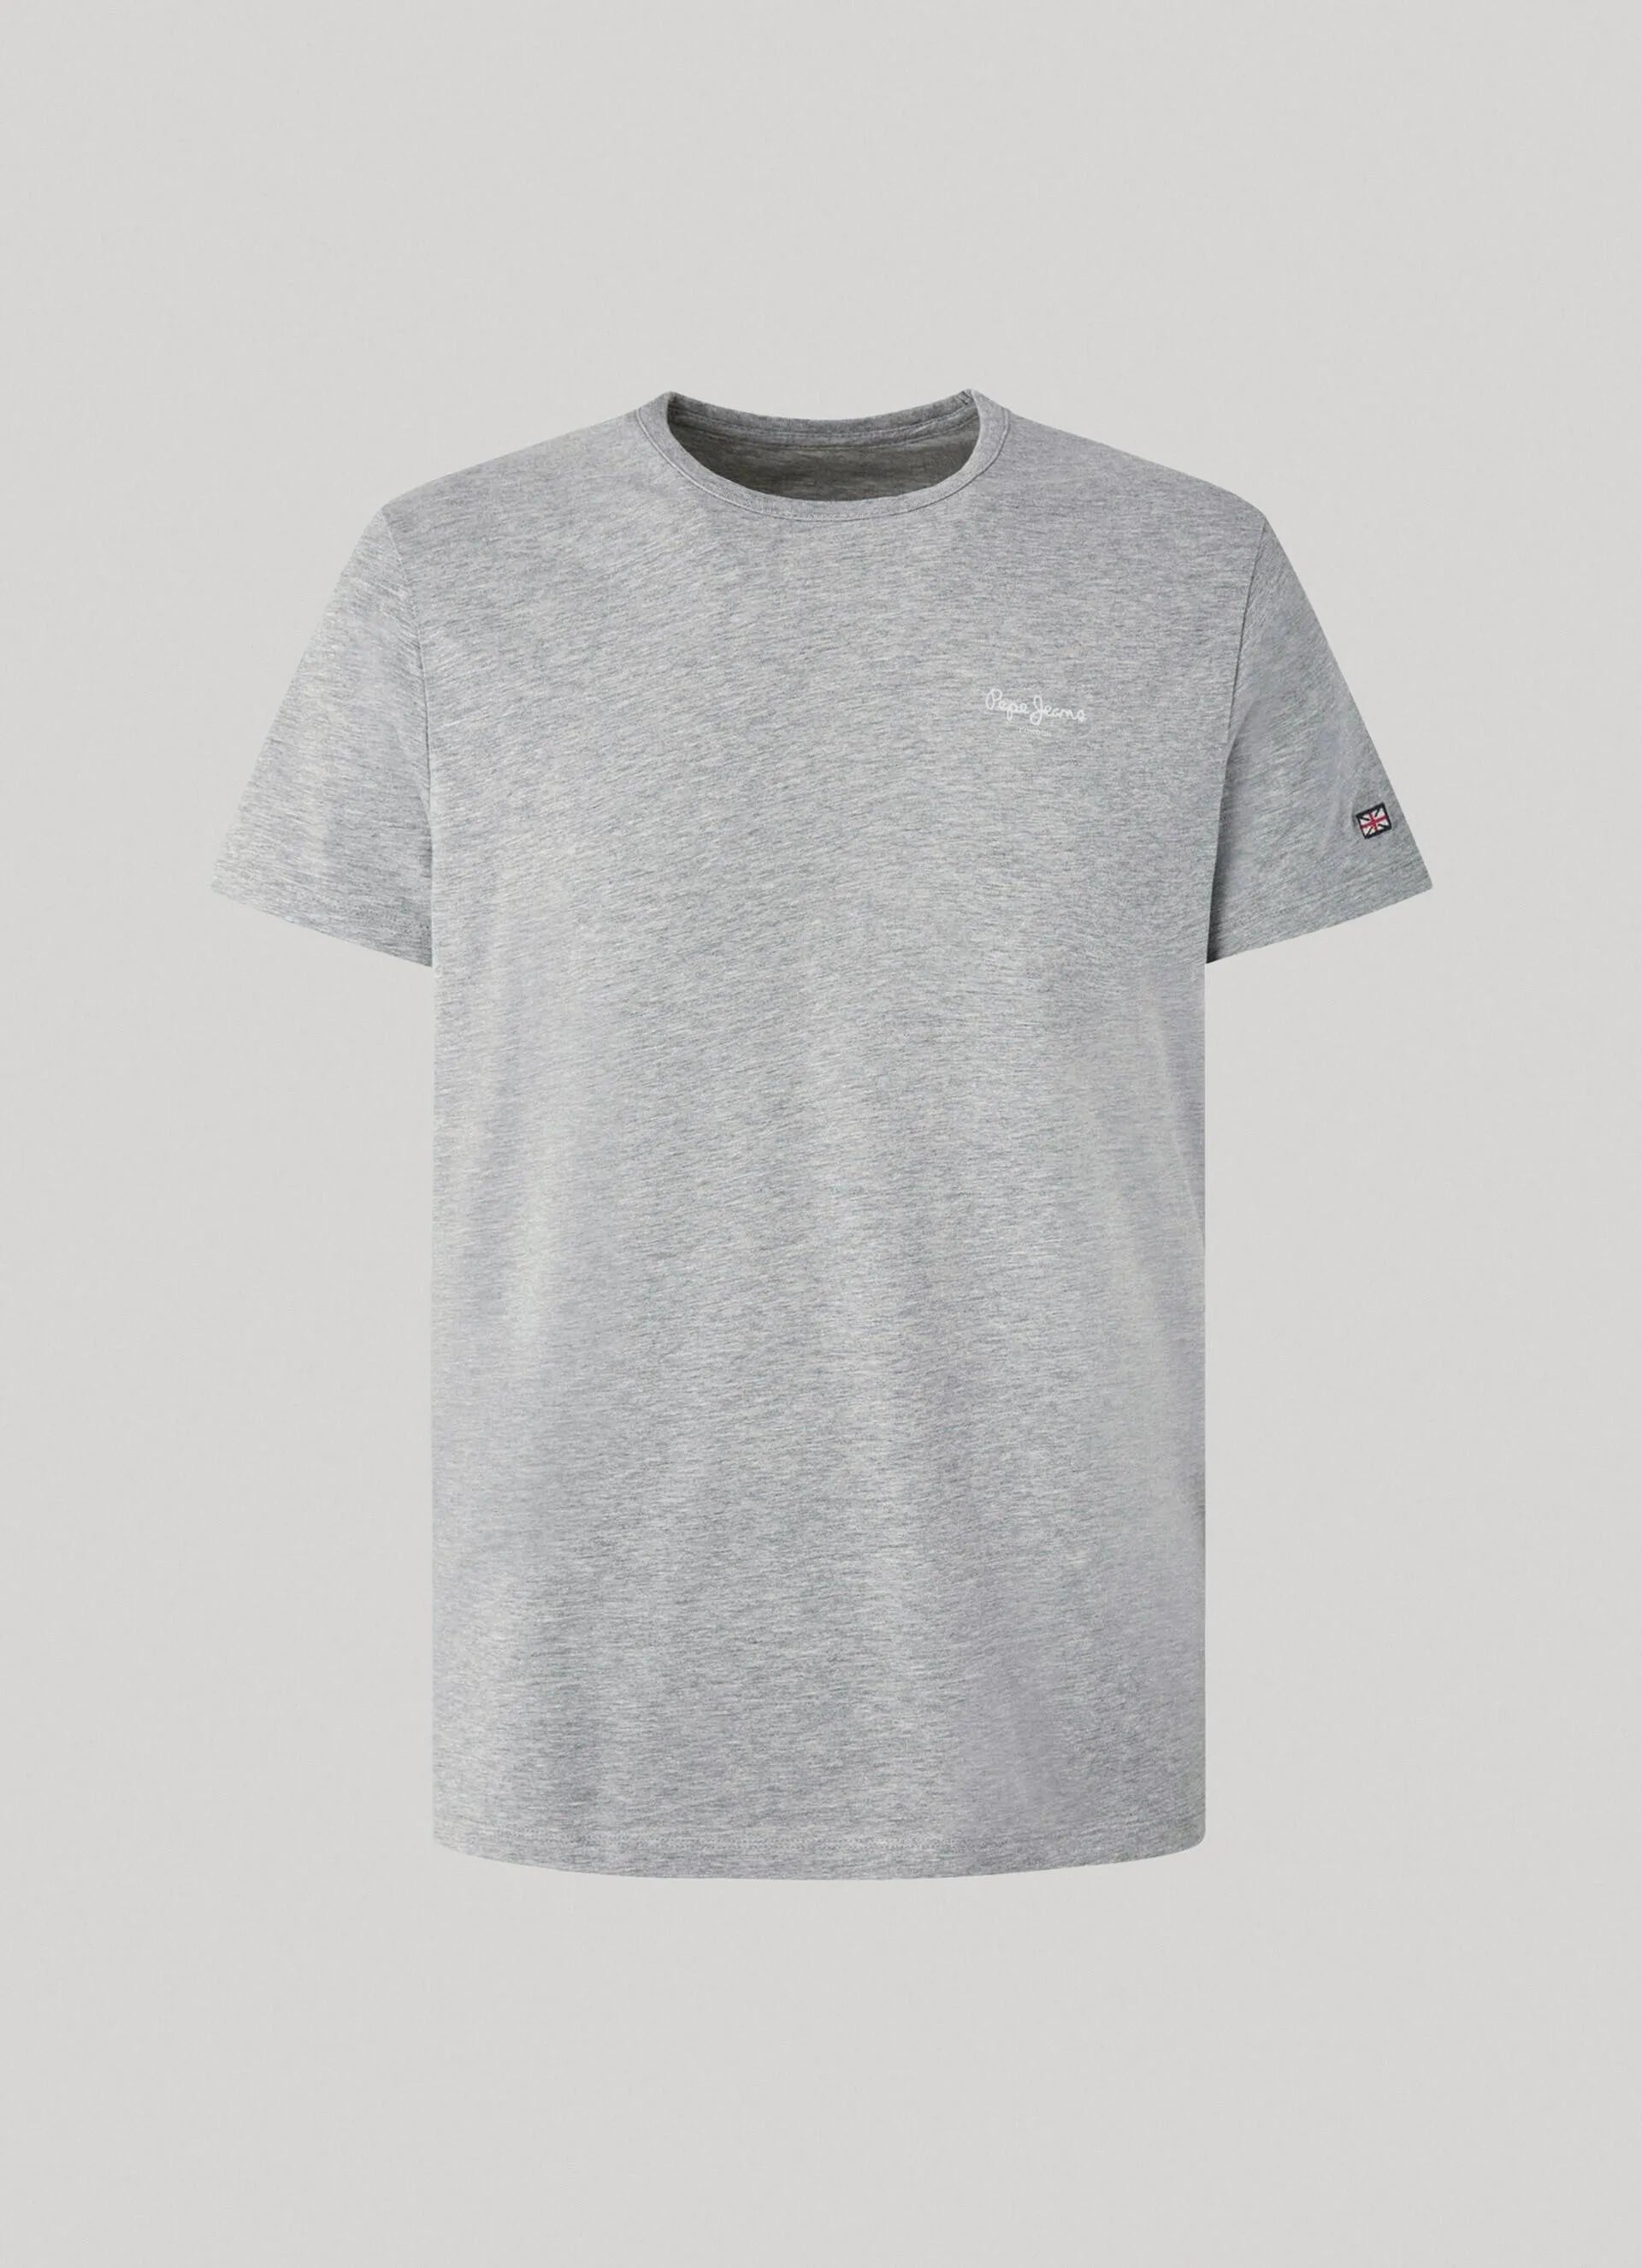 Grey men's t-shirt, Pepe Jeans, casual comfort and style. Look sharp and feel relaxed in the Pepe Jeans grey t-shirt, perfect for any occasion. Elevate your everyday wardrobe with the soft grey t-shirt from Pepe Jeans.